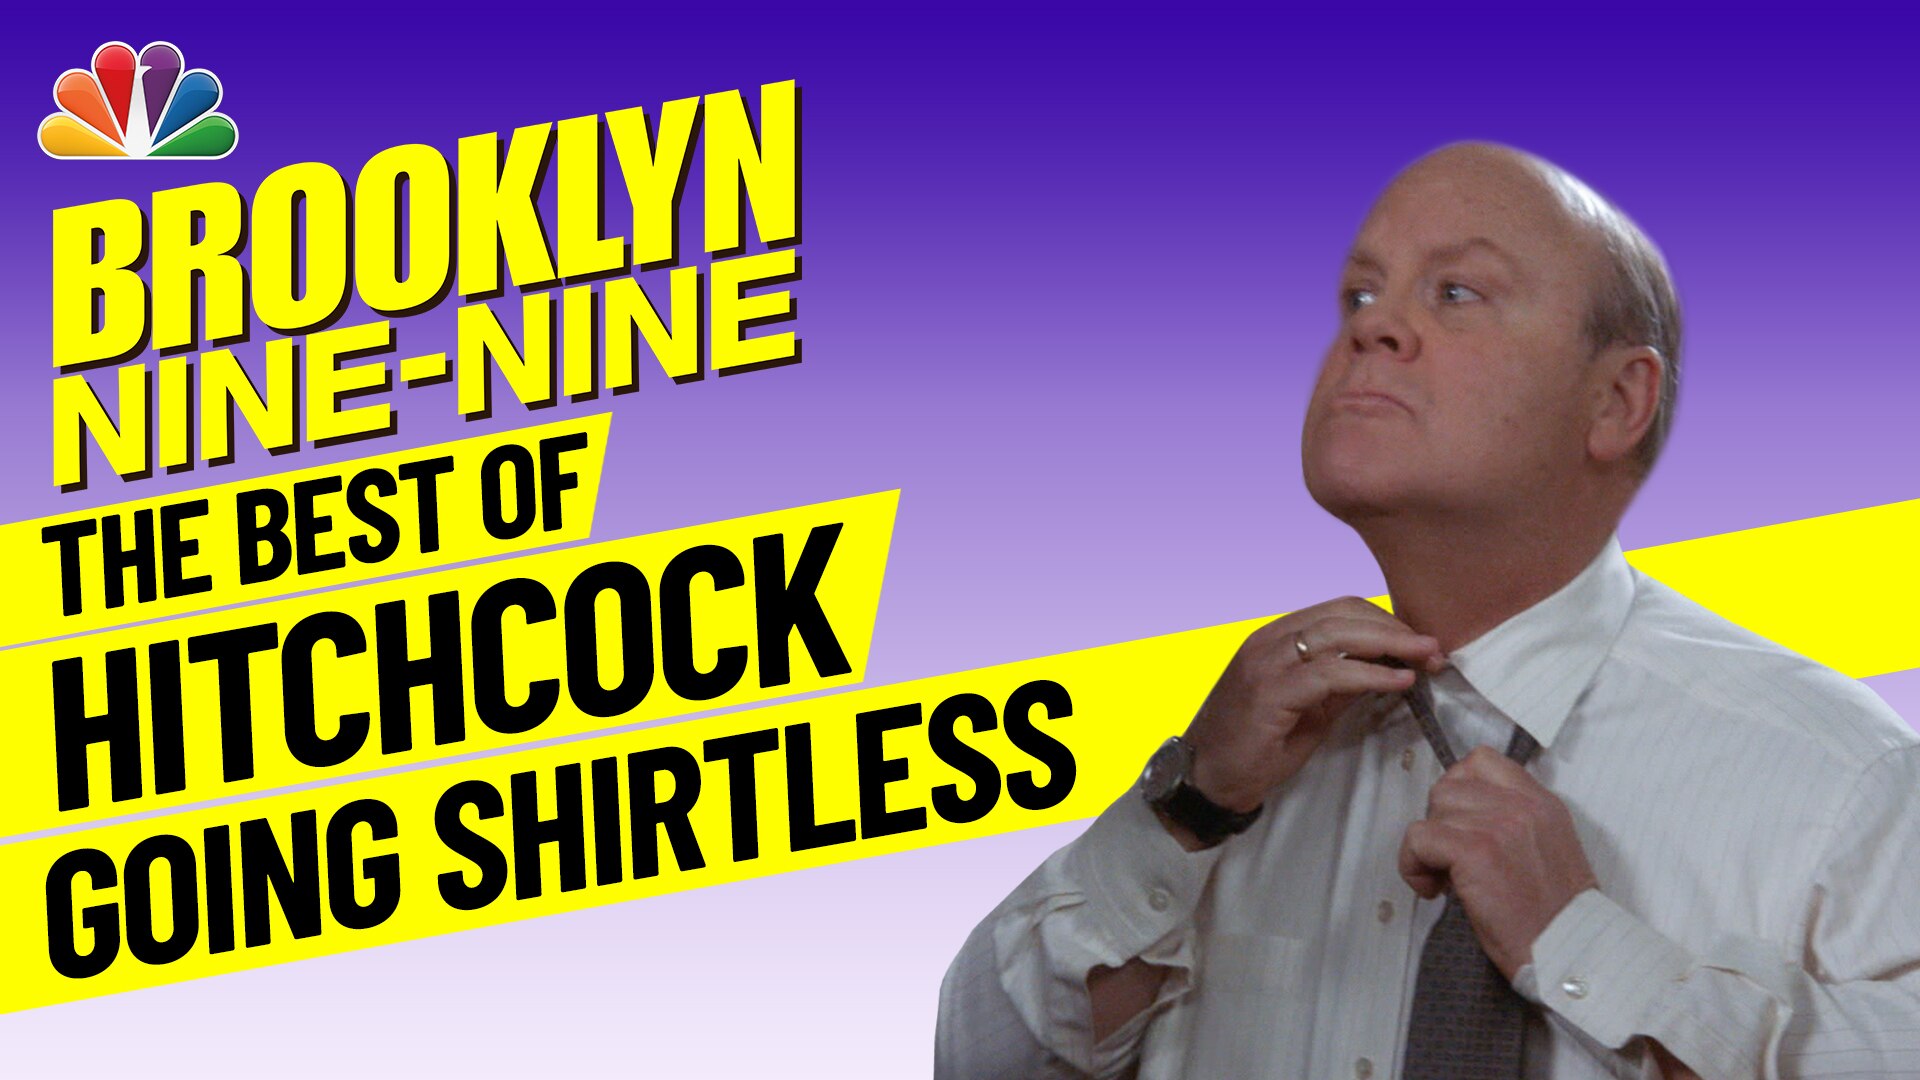 Watch Brooklyn Nine Nine Web Exclusive The Best Of Hitchcock Going Shirtless 6146